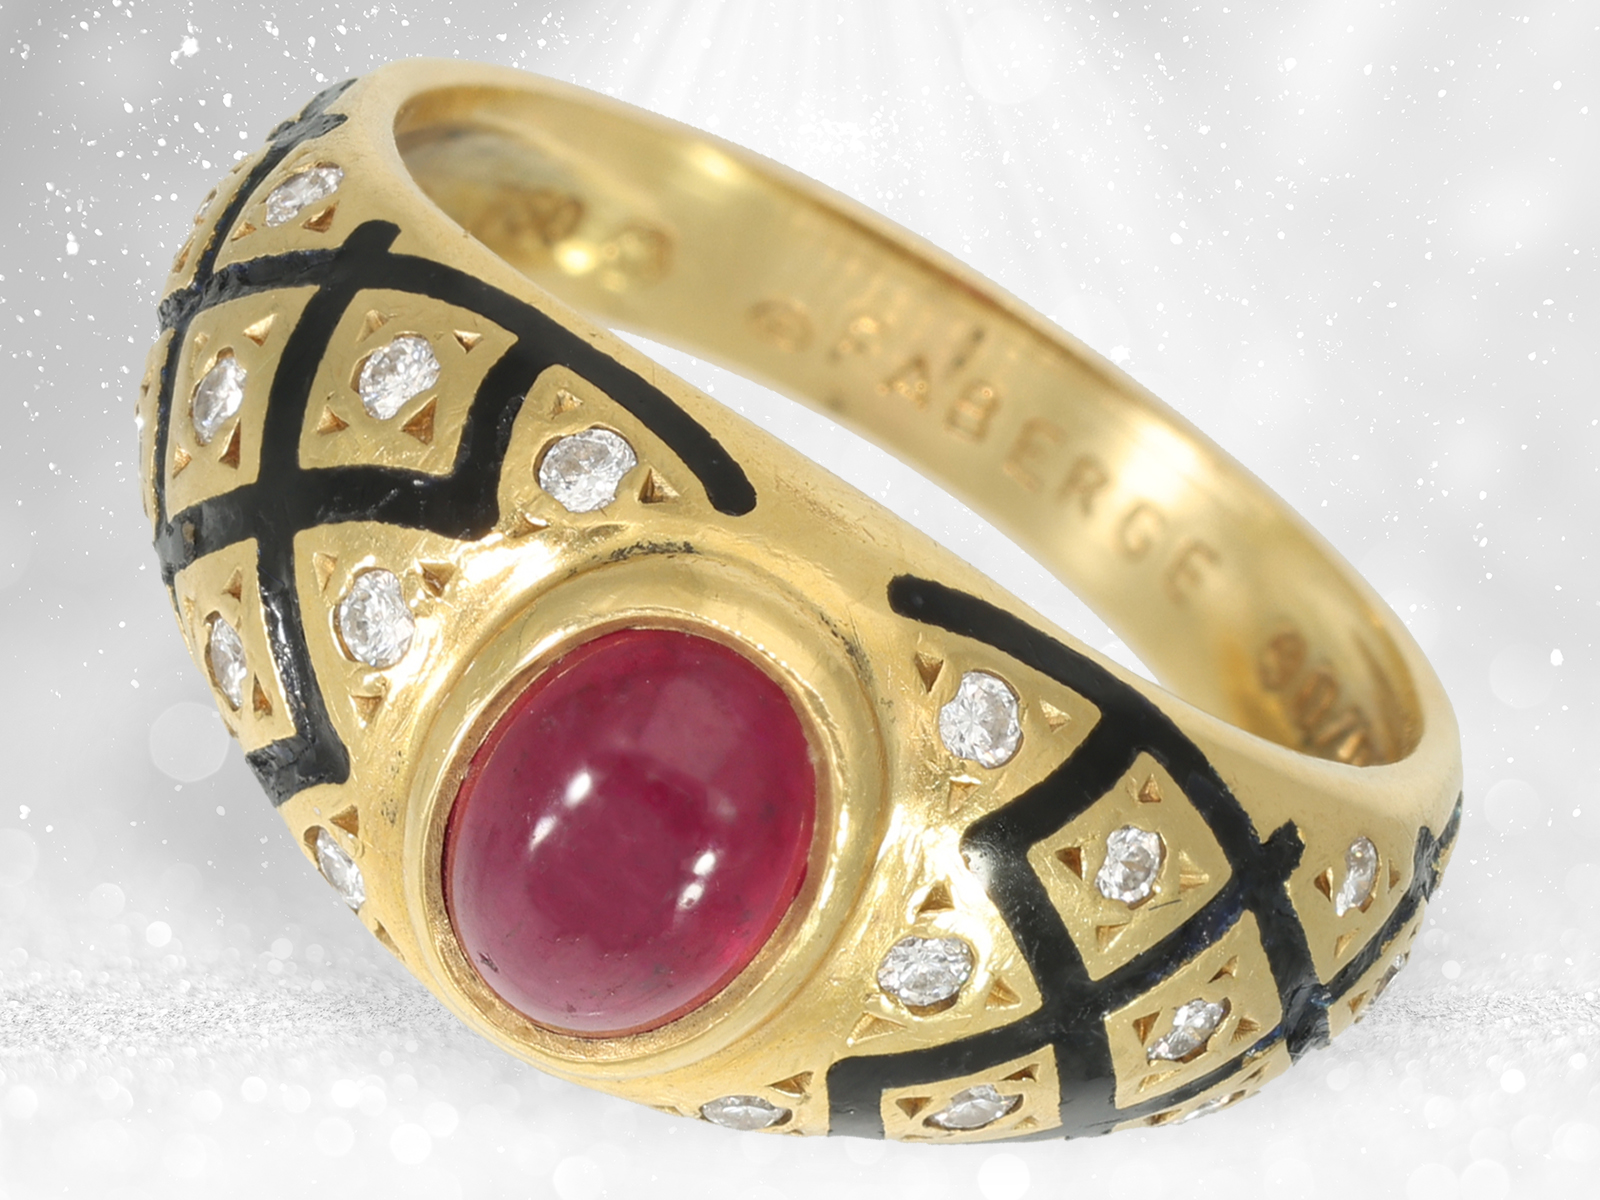 Rare vintage ruby/brilliant-cut diamond ring, FABERGÉ JEWELLERY by VICTOR MAYER - Image 3 of 5